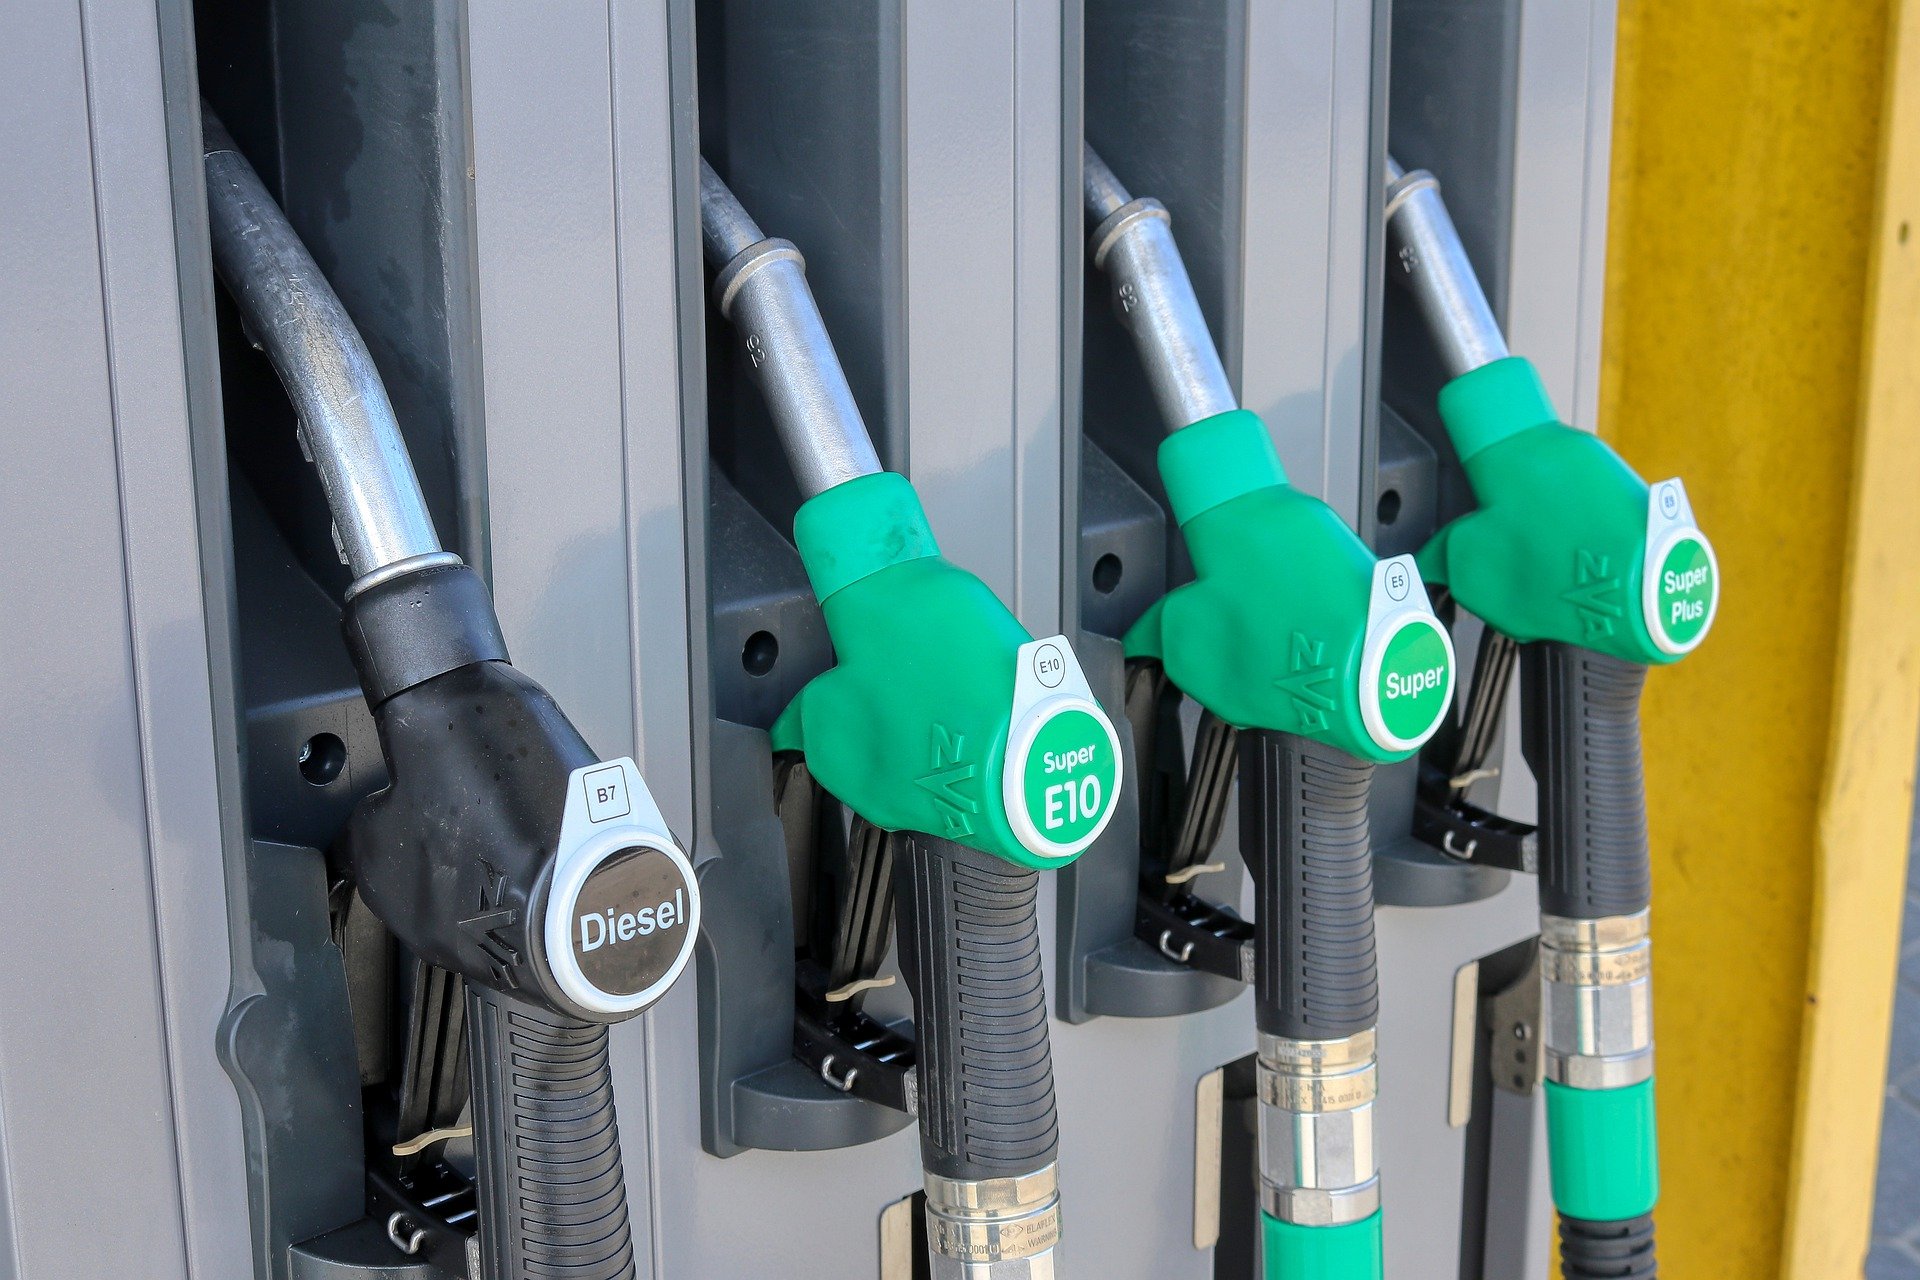 Petrol Tourism Thrives in Hungary after Gov't Introduction of Fuel Price Cap